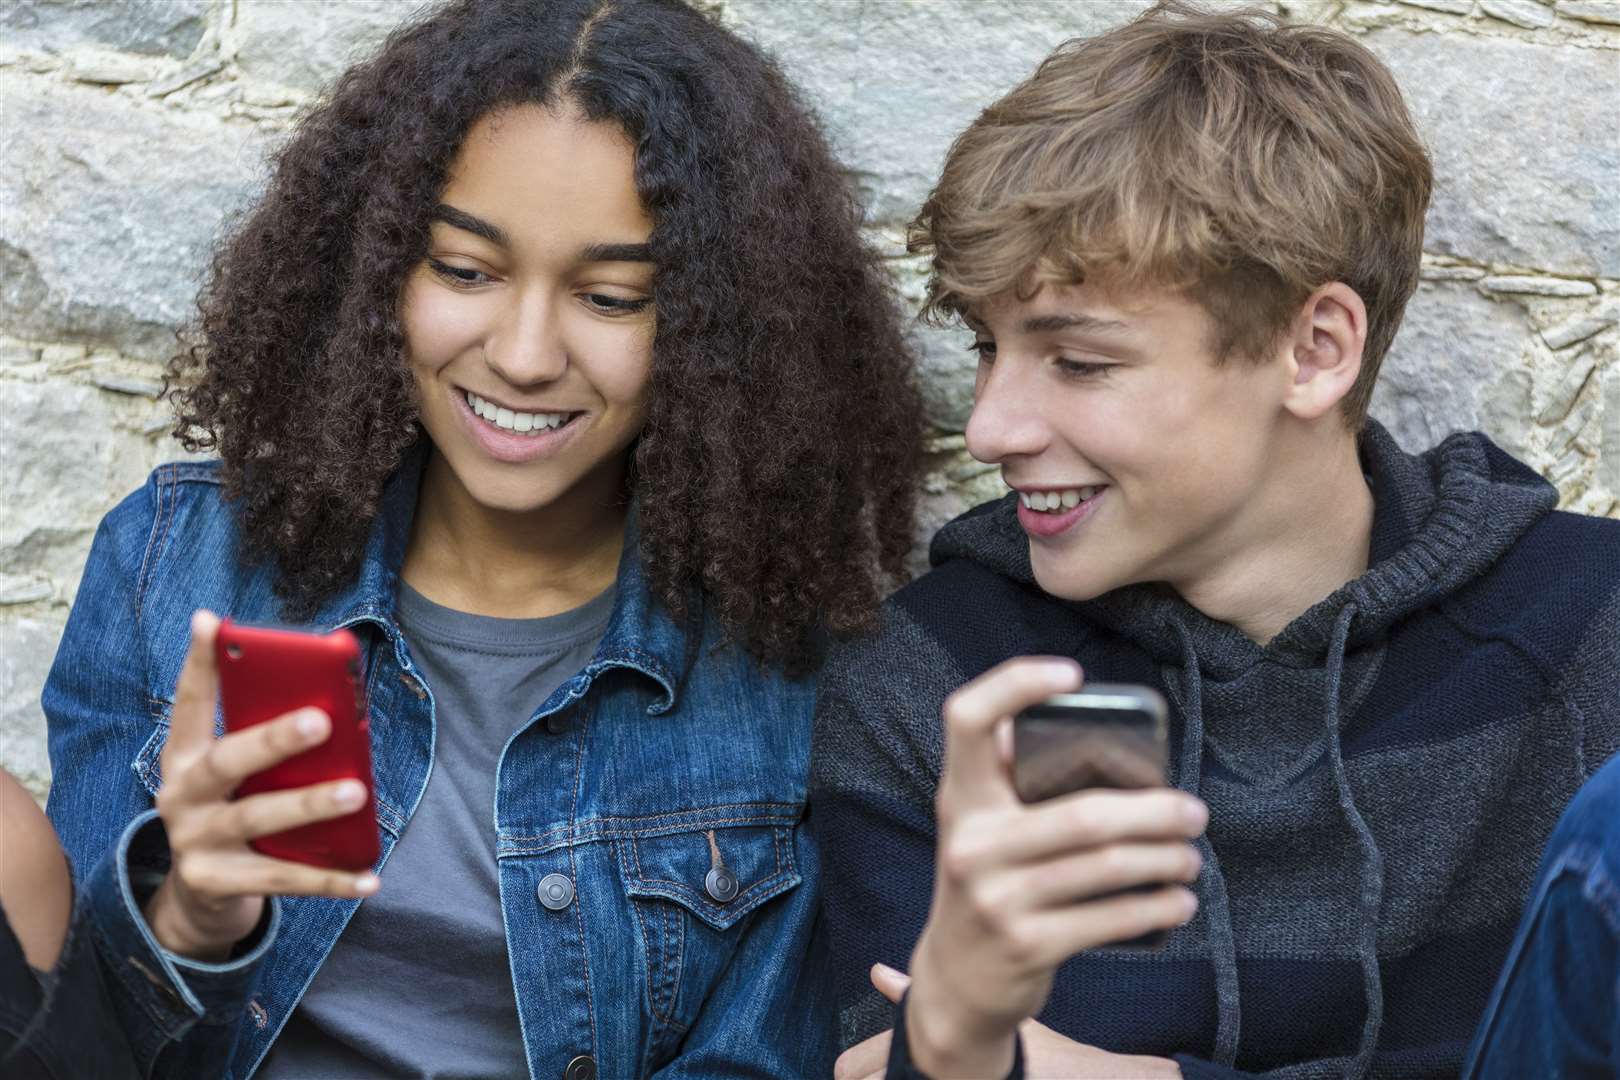 Social media and the internet is said to have encouraged a growth in urban slang among teenagers